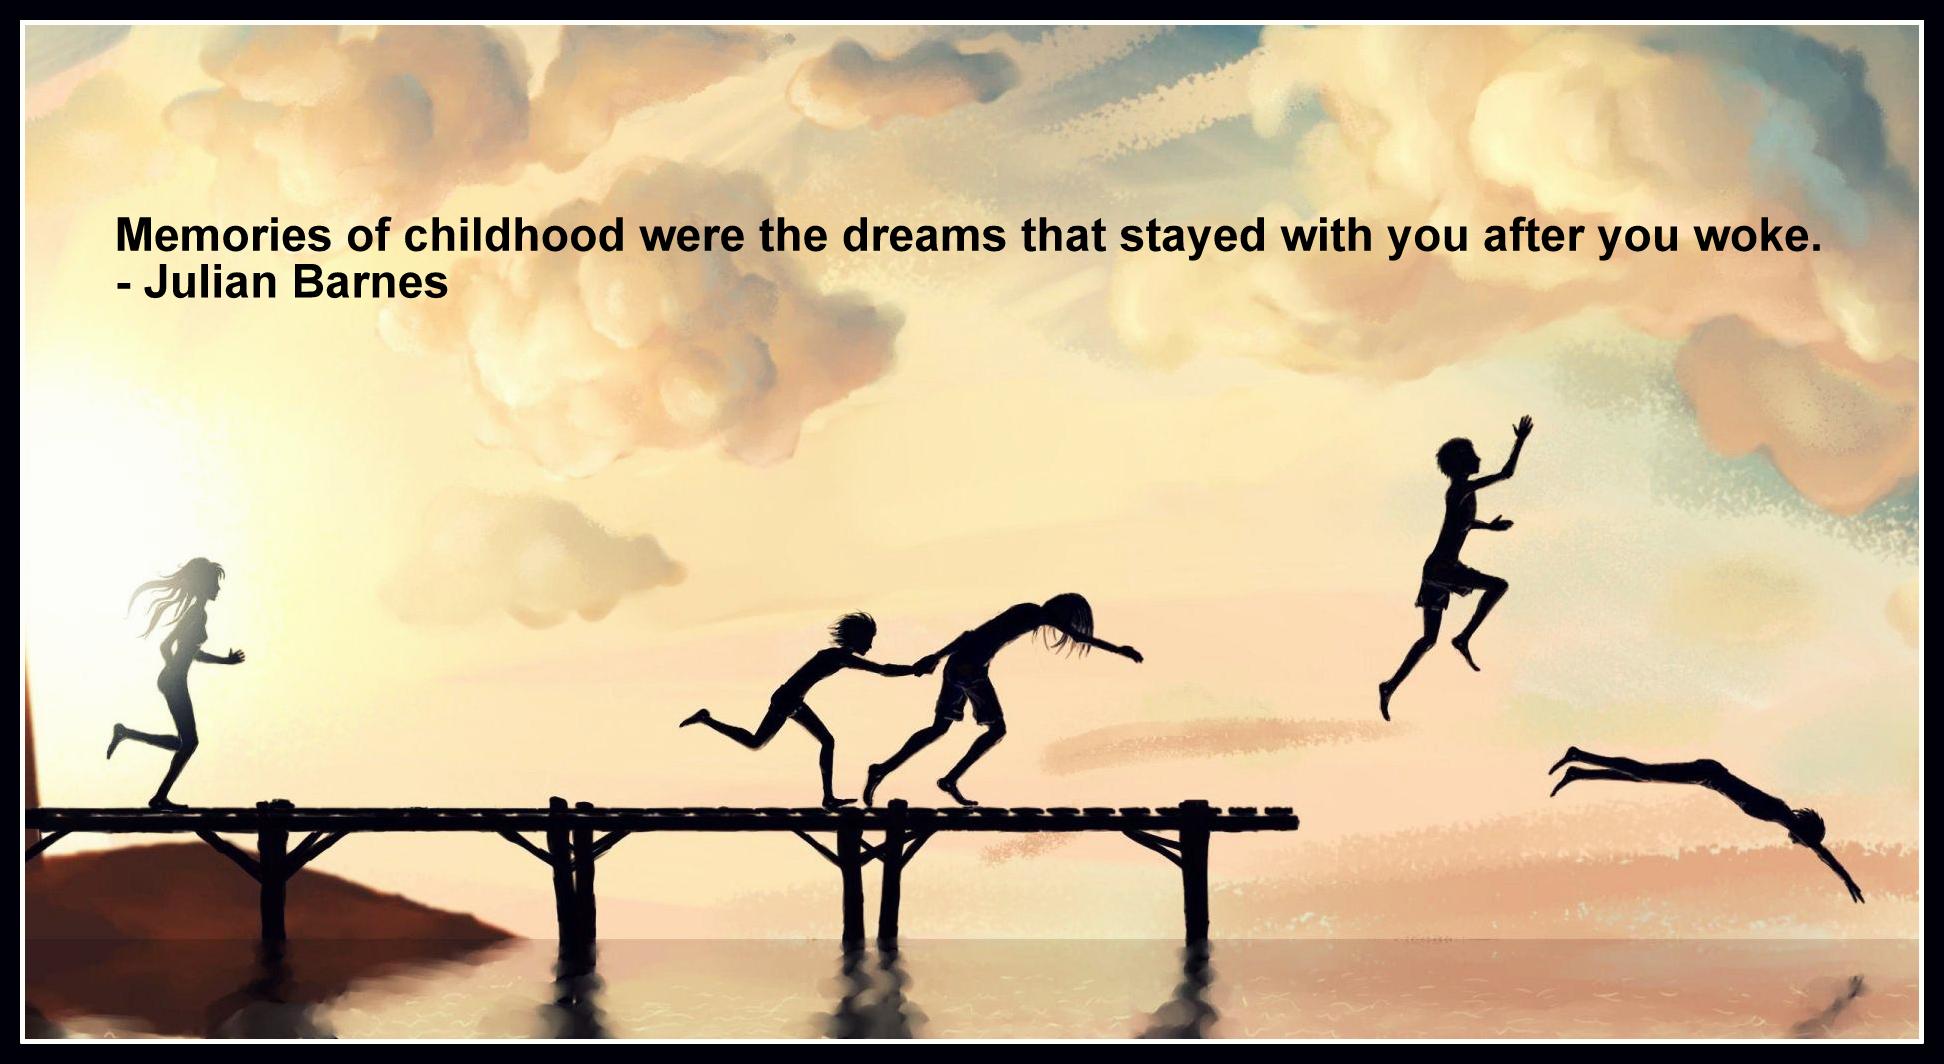 Memories of childhood were the dreams that stayed with you after you woke.- Julian Barnes